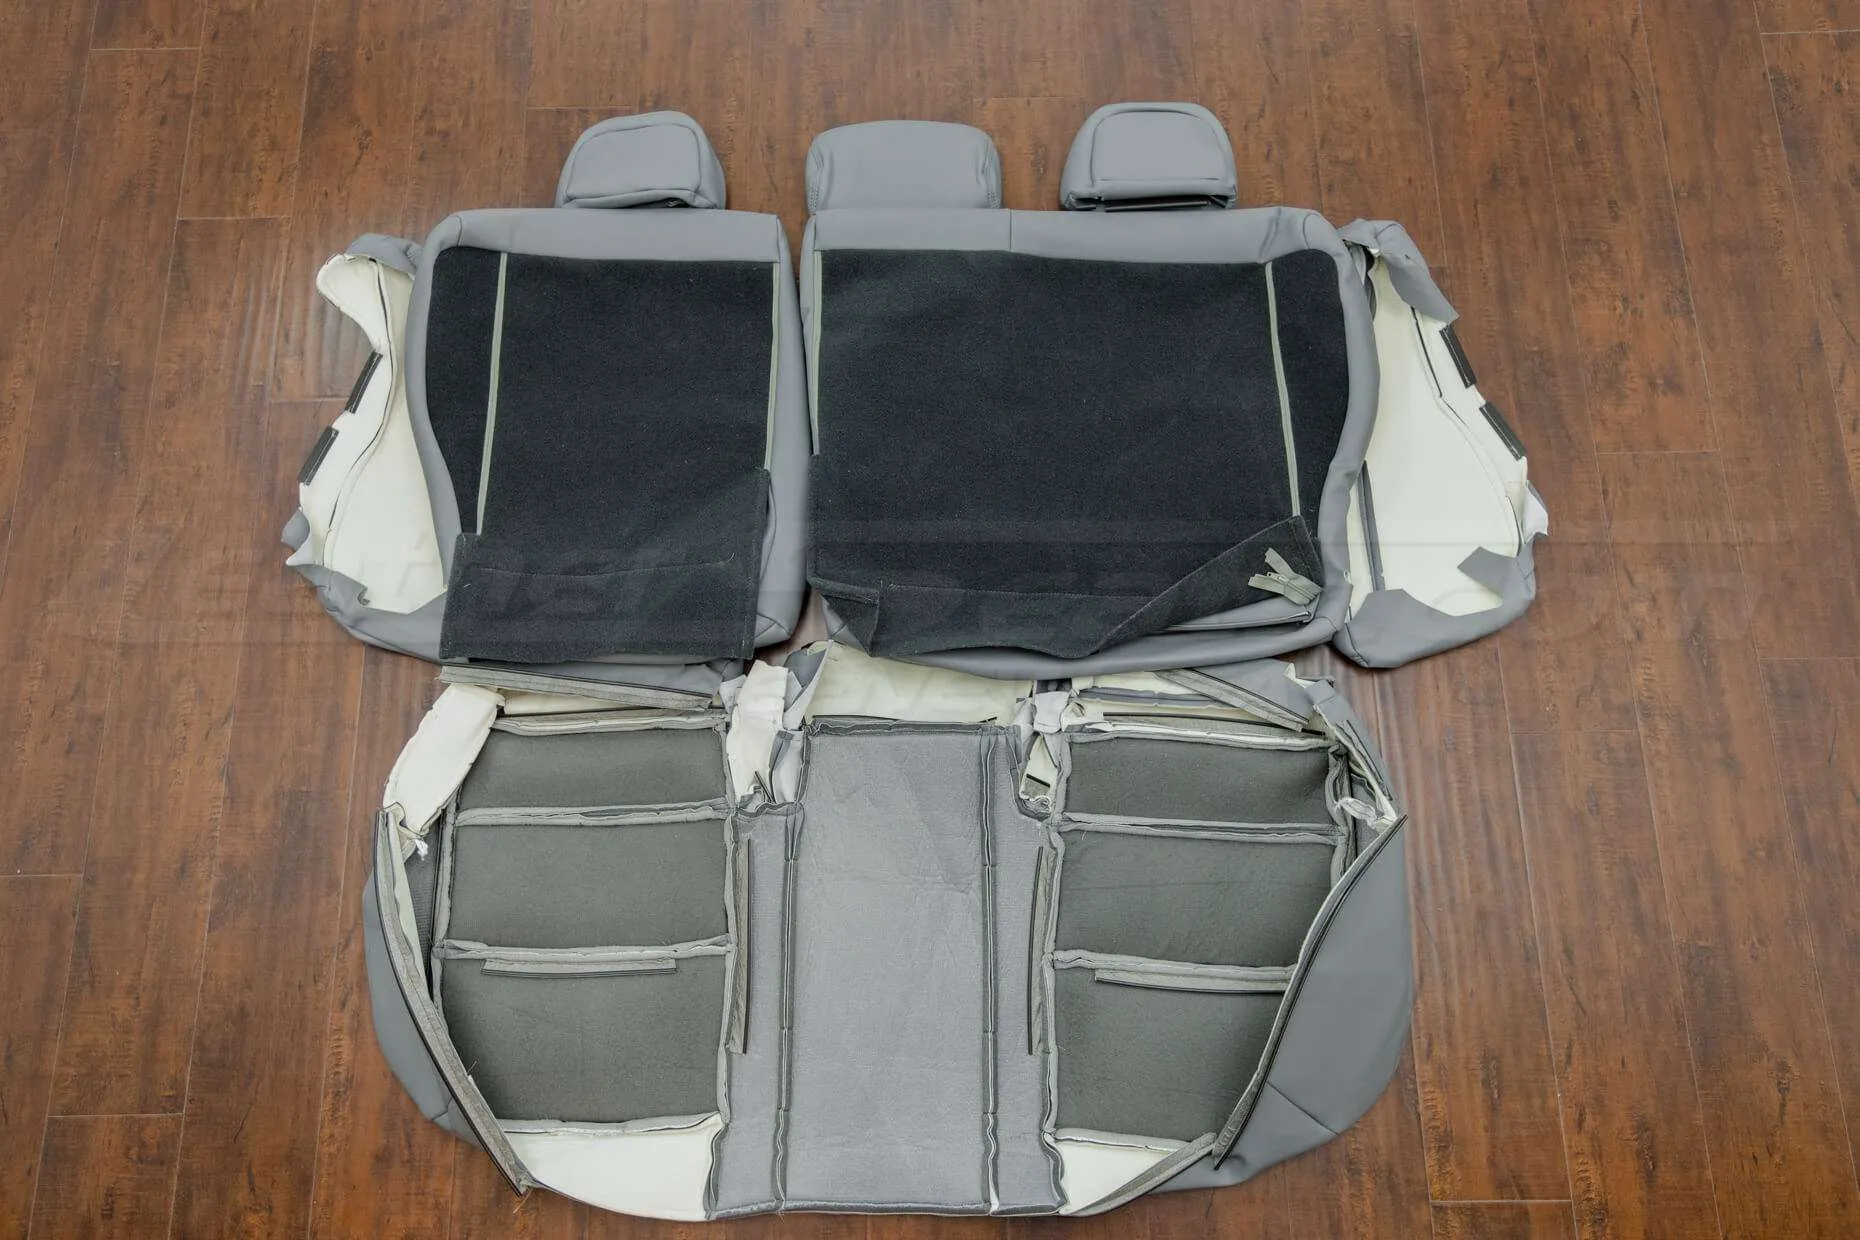 Back view of rear seat upholstery and bolsters